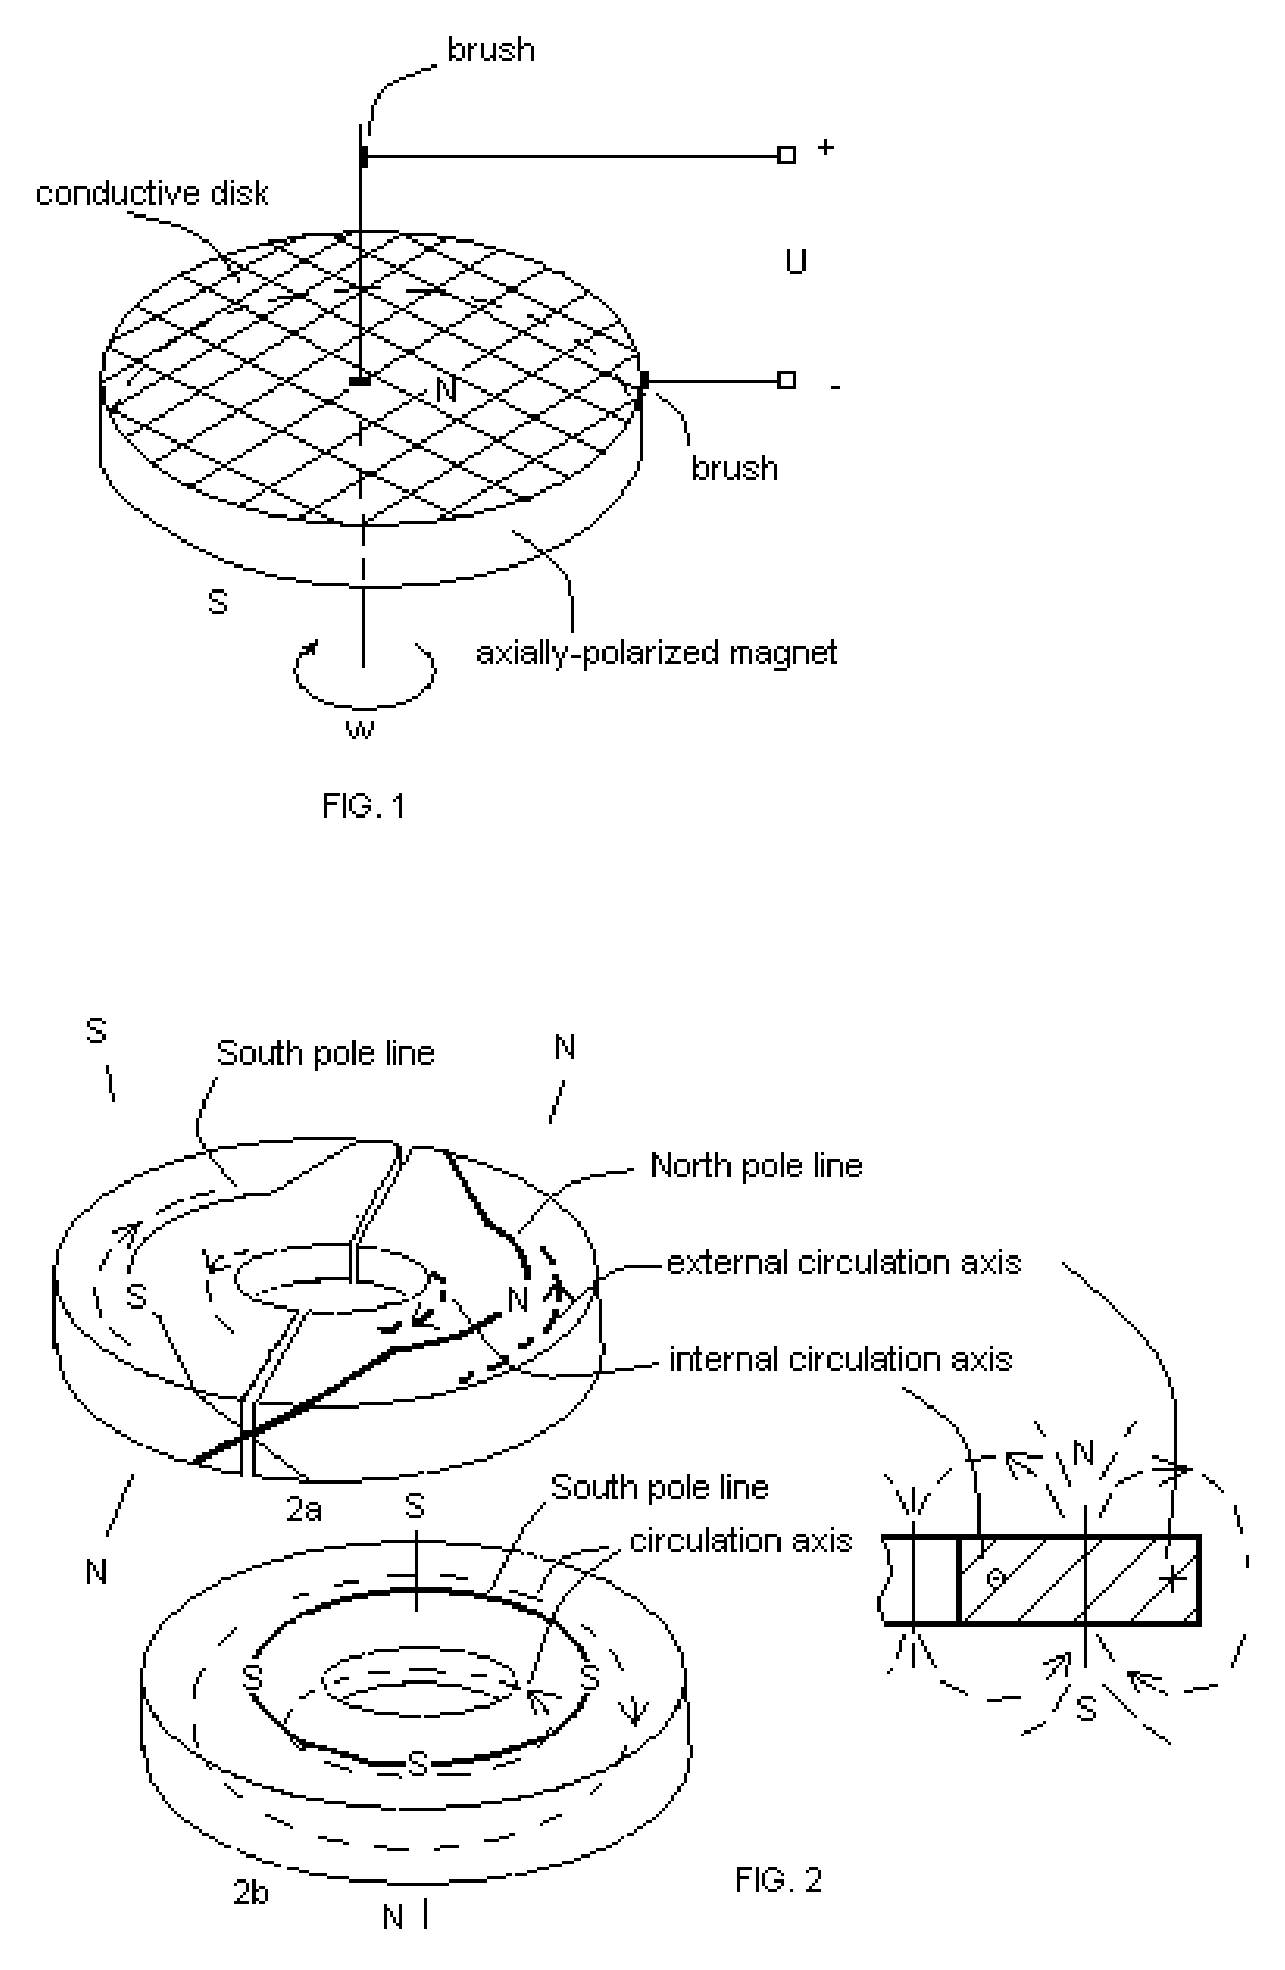 Tangential induction dynamoelectric machines